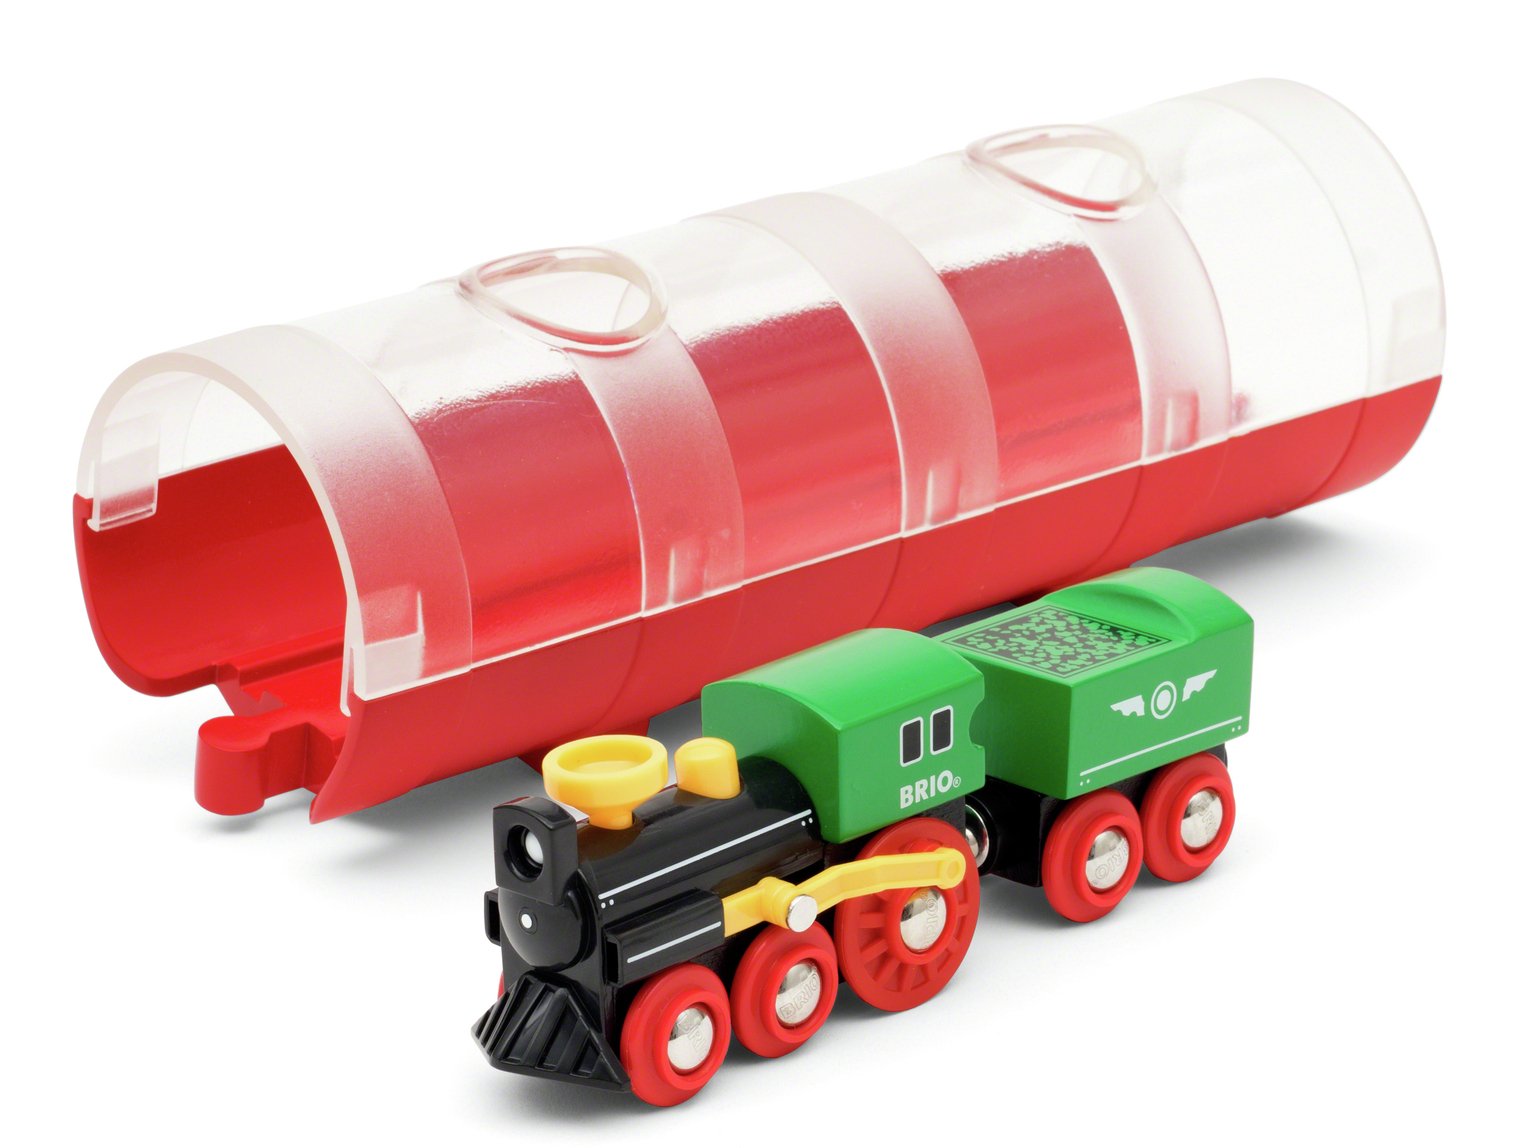 BRIO Tunnel and Steam Train Playset Review